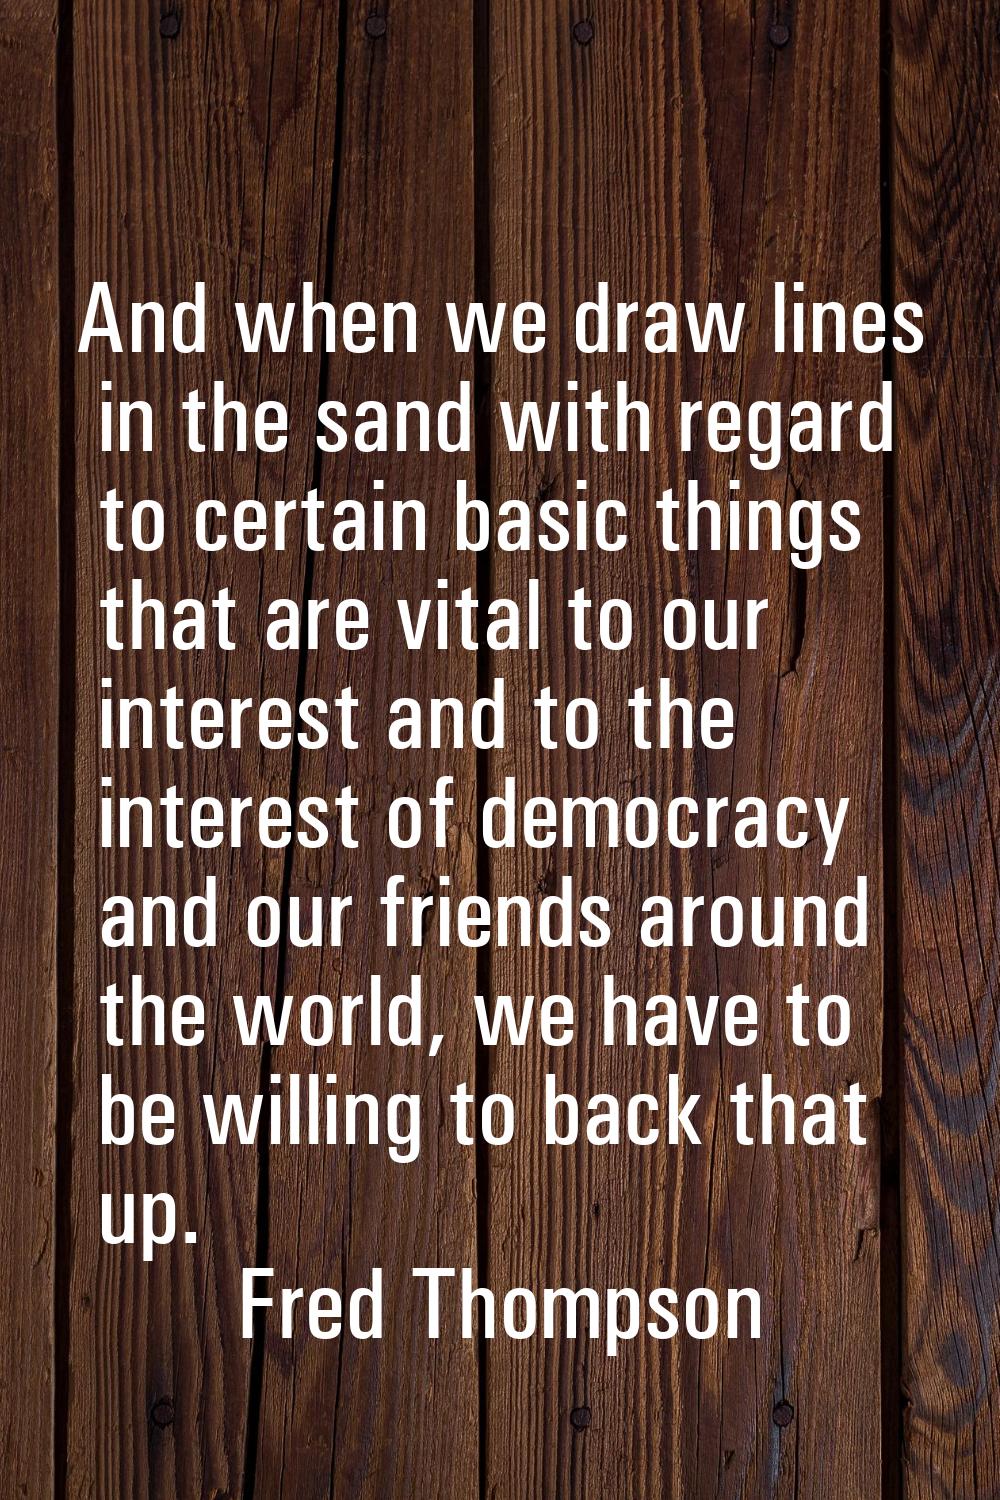 And when we draw lines in the sand with regard to certain basic things that are vital to our intere